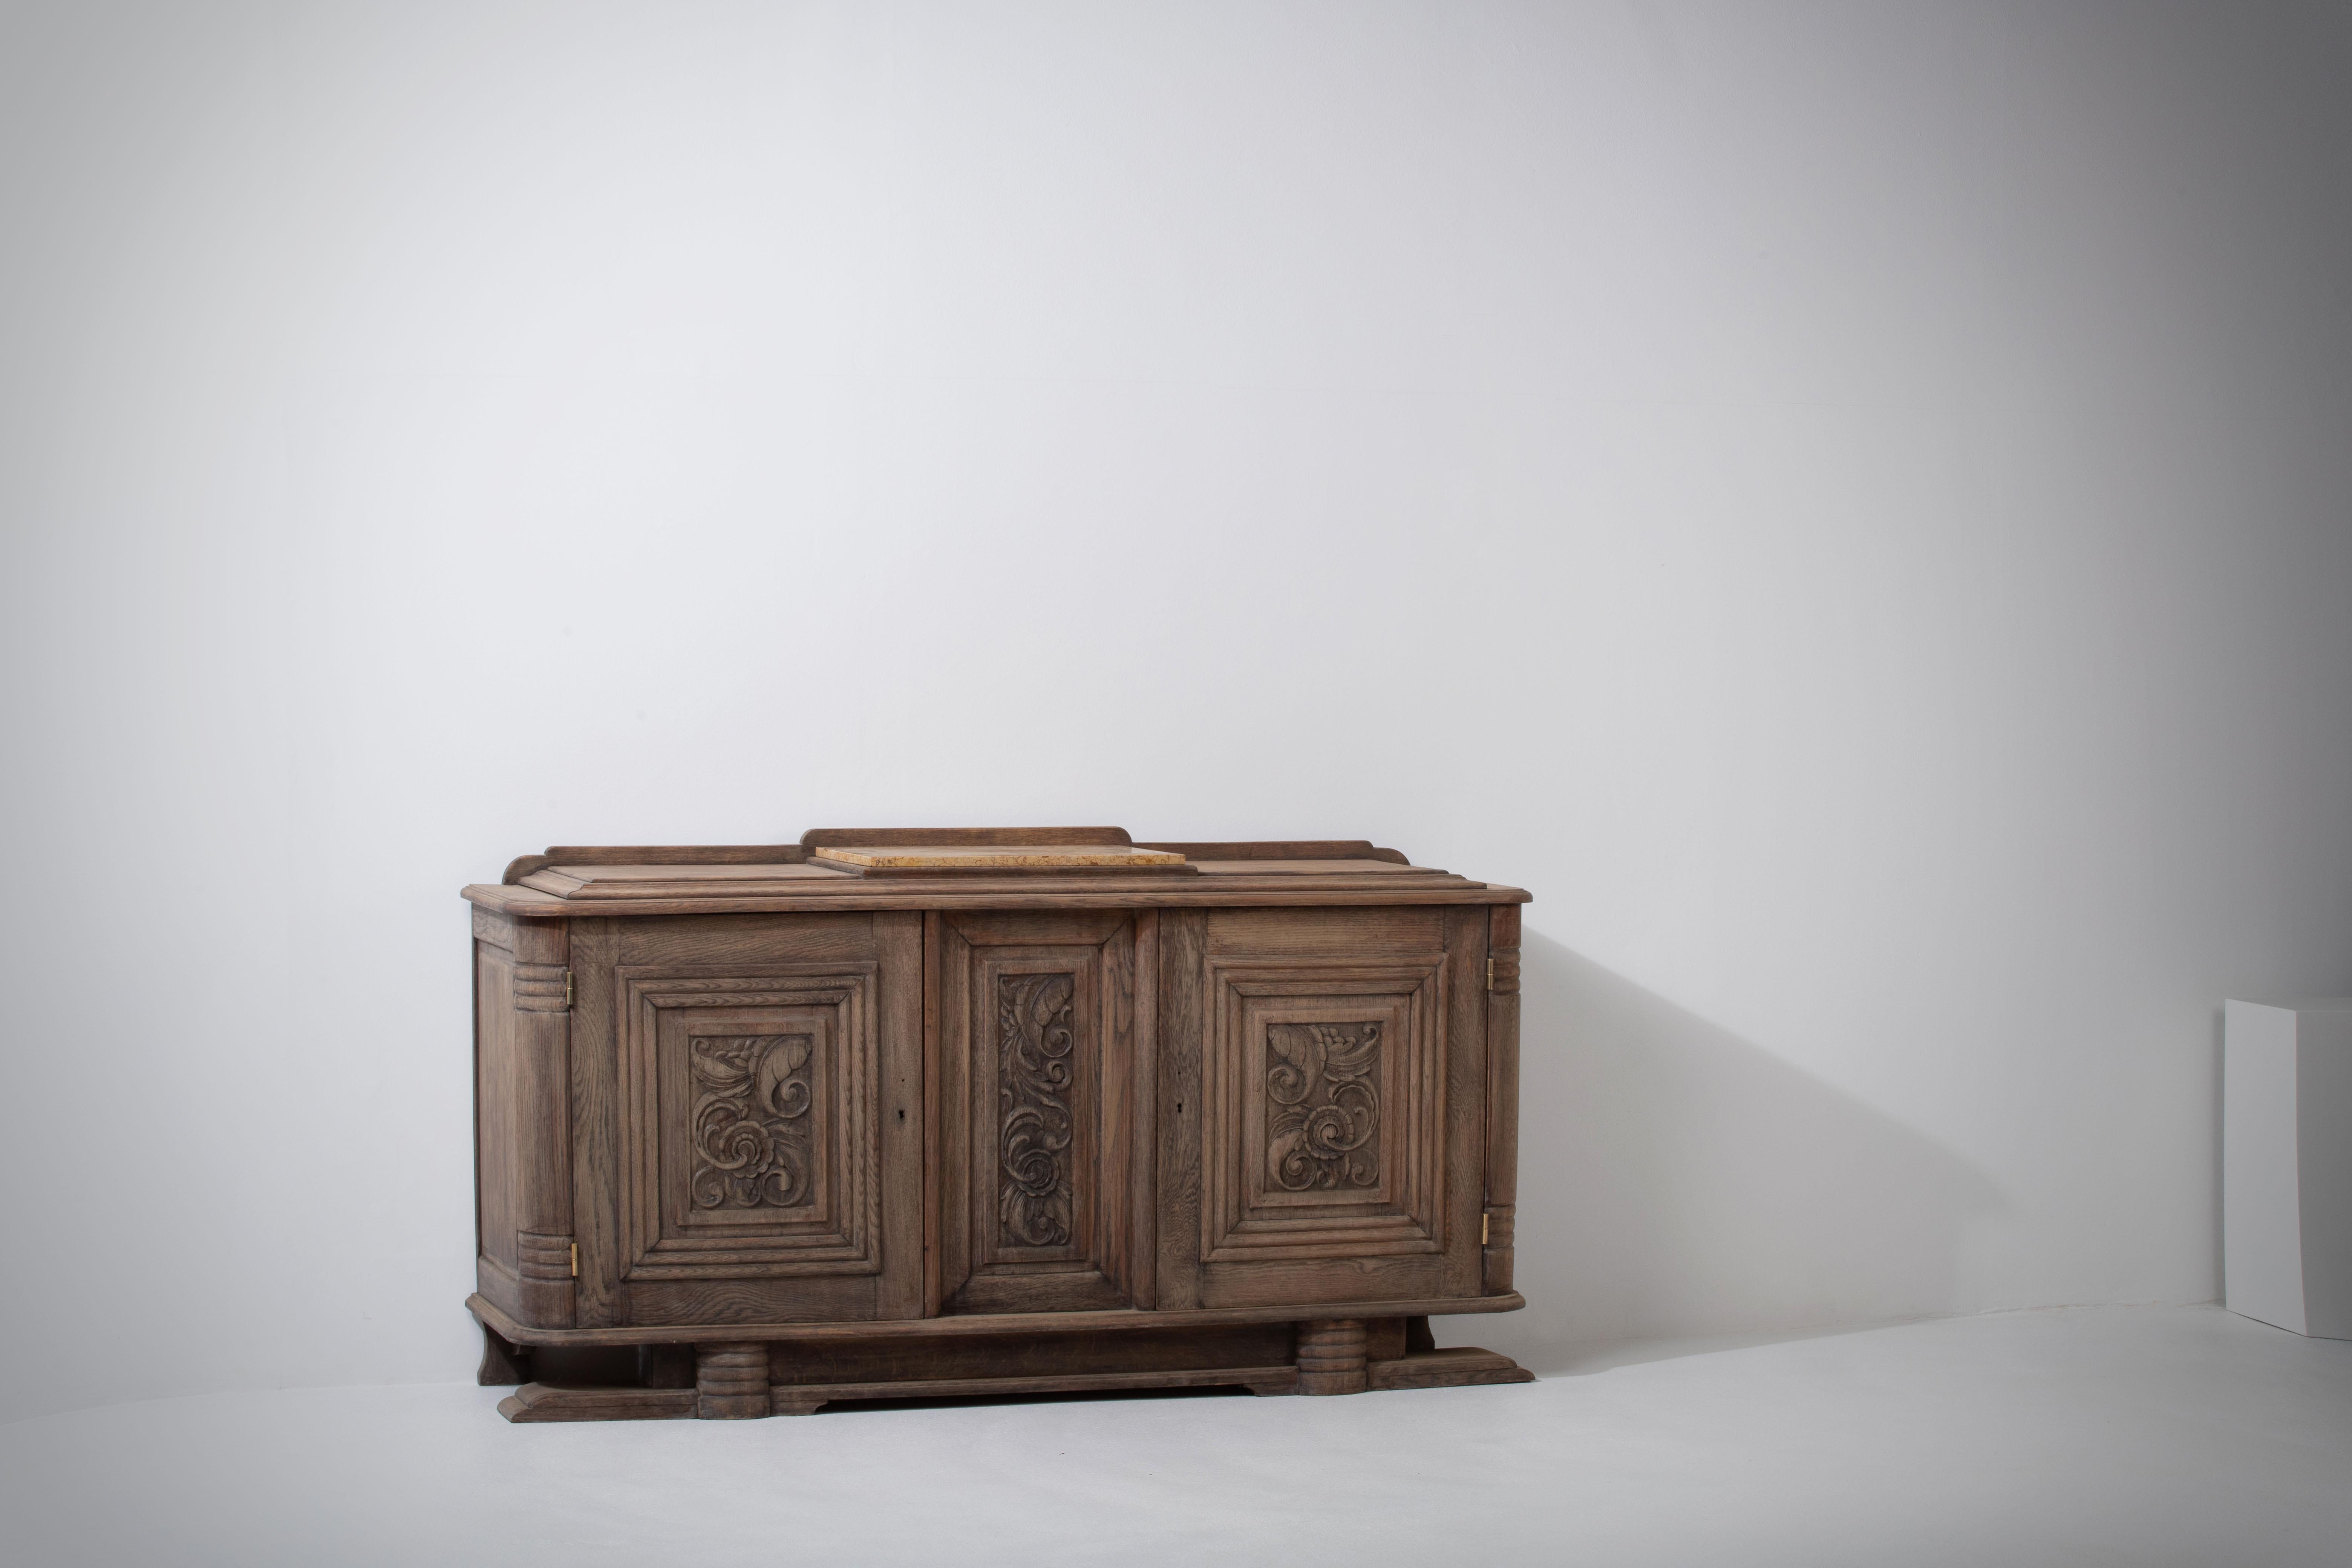 Introducing an exquisite patinated Art Deco sideboard from the 1940s, showcasing the timeless beauty of natural oak. This impressive piece exudes a rustic charm, embodying the distinctive French style of the era. Crafted with meticulous attention to